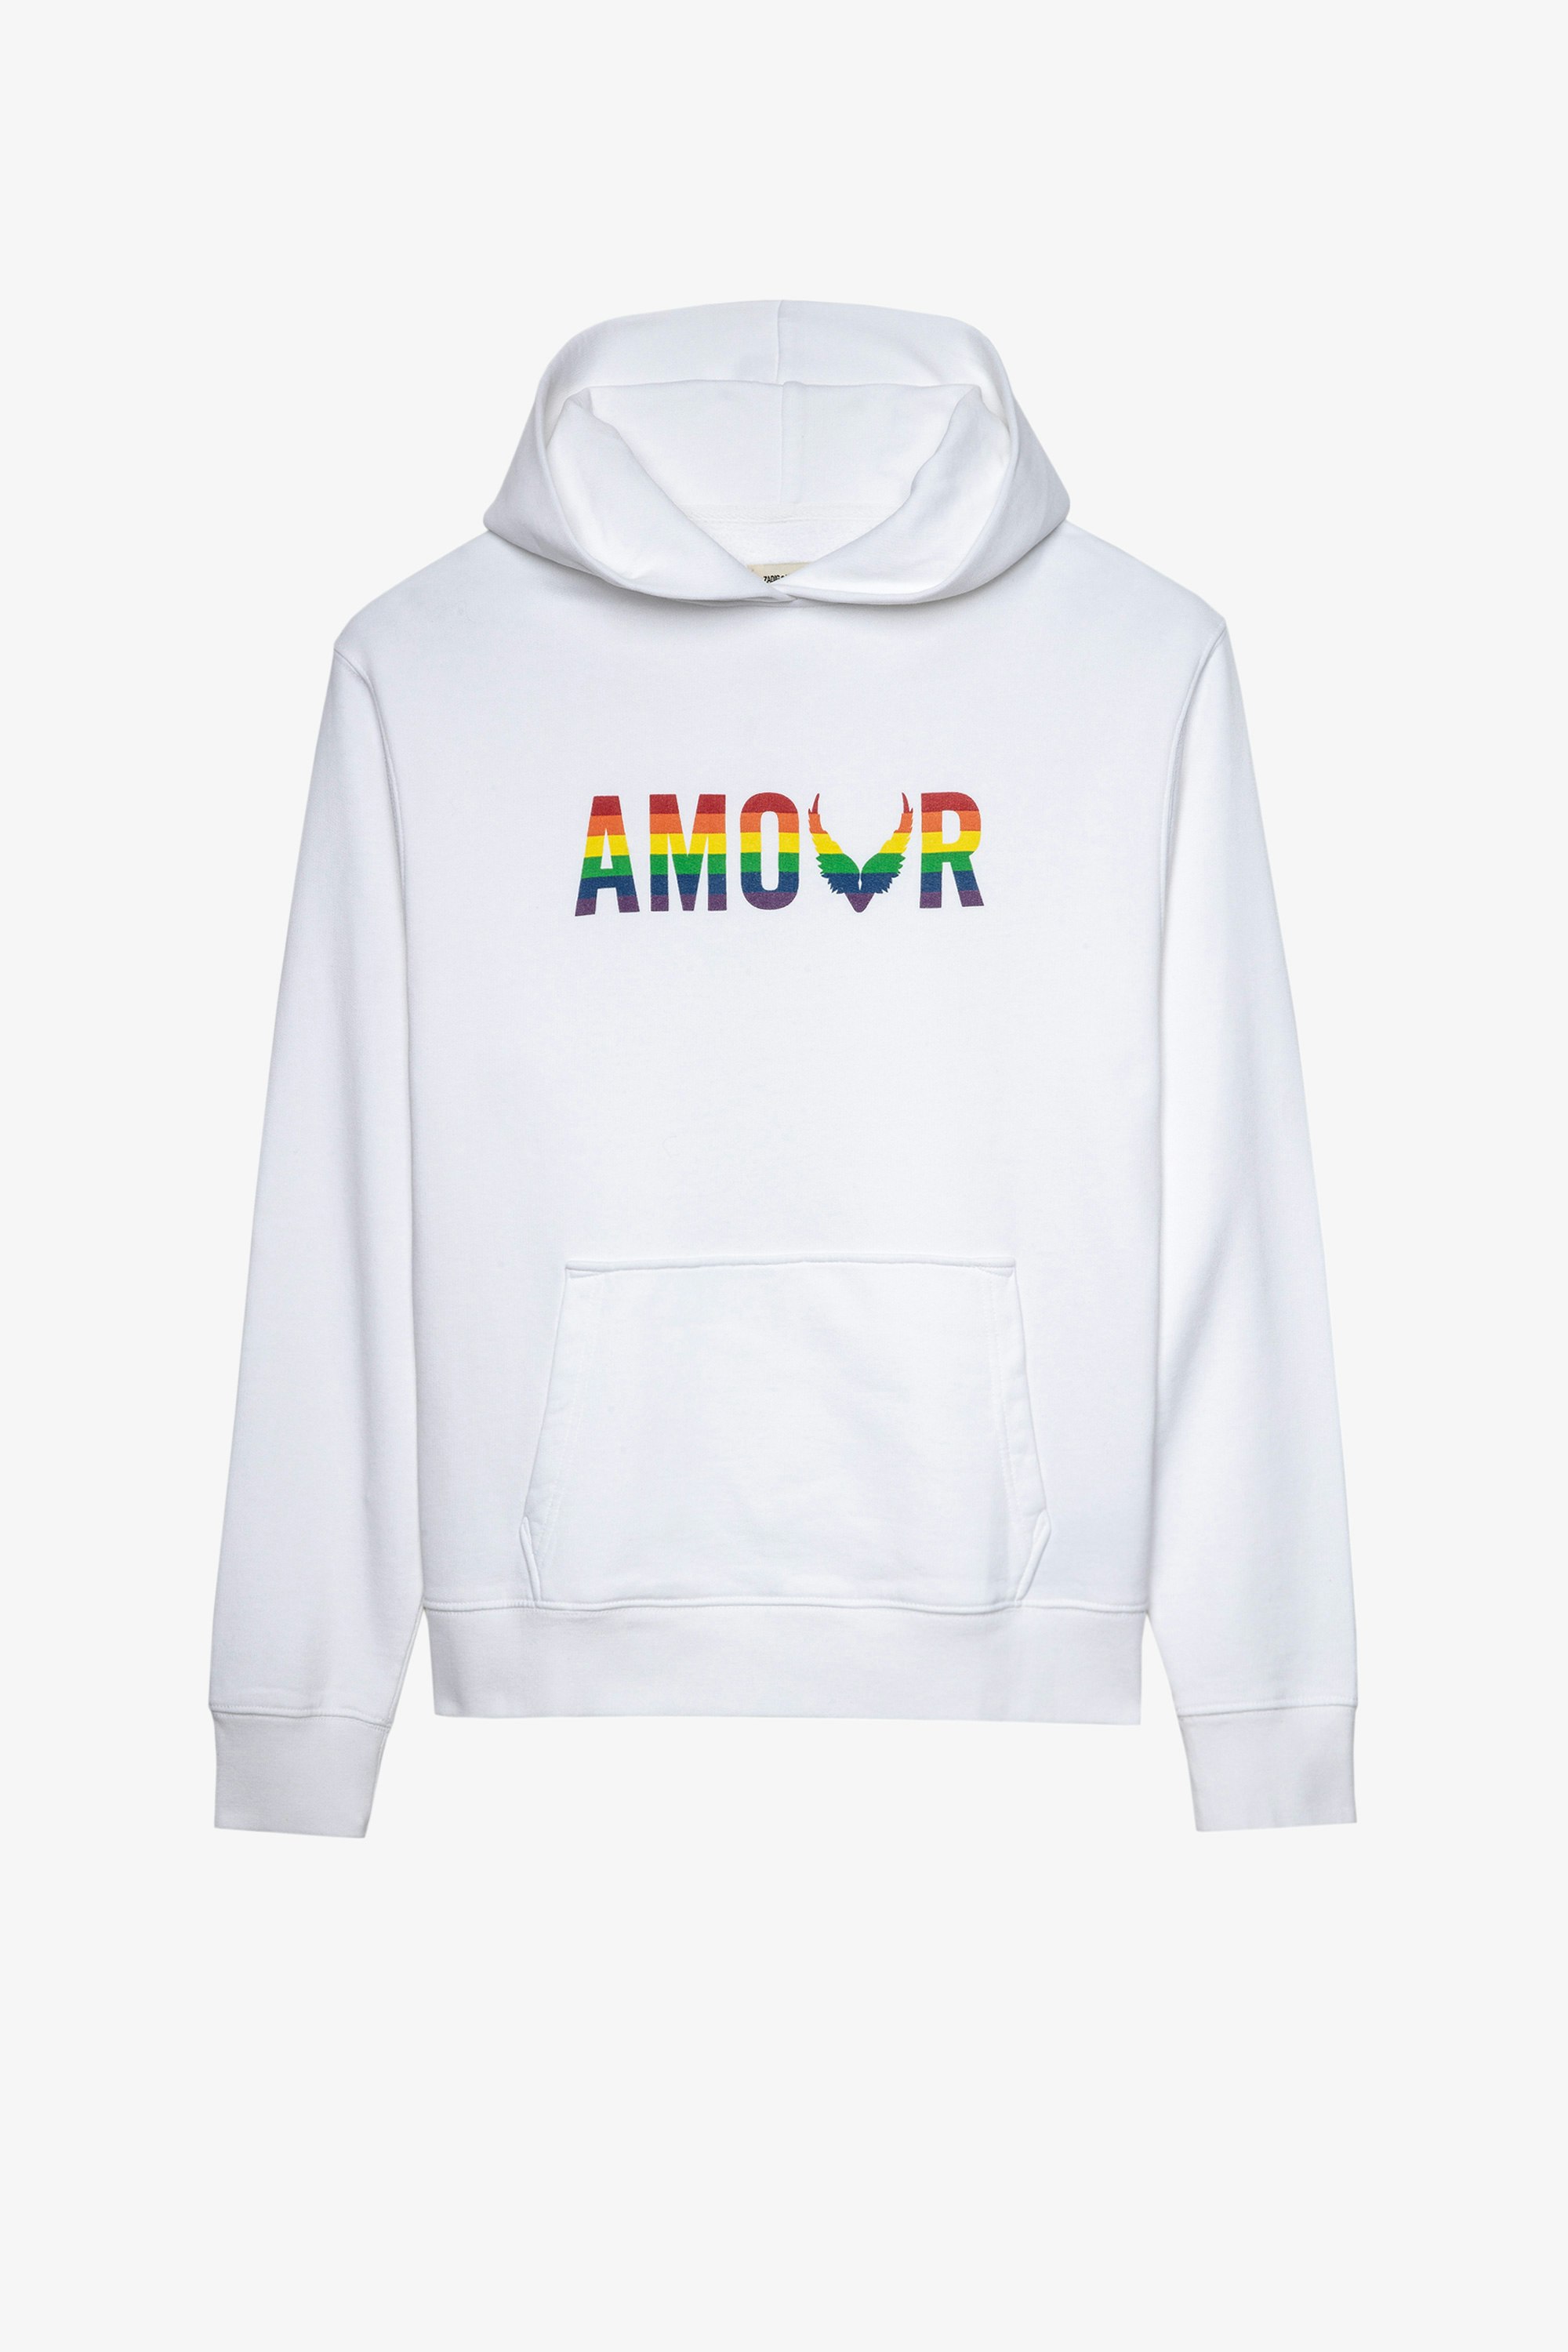 Sanchi Amour Wings Sweatshirt Women’s white cotton hooded sweatshirt with multicoloured Amour print